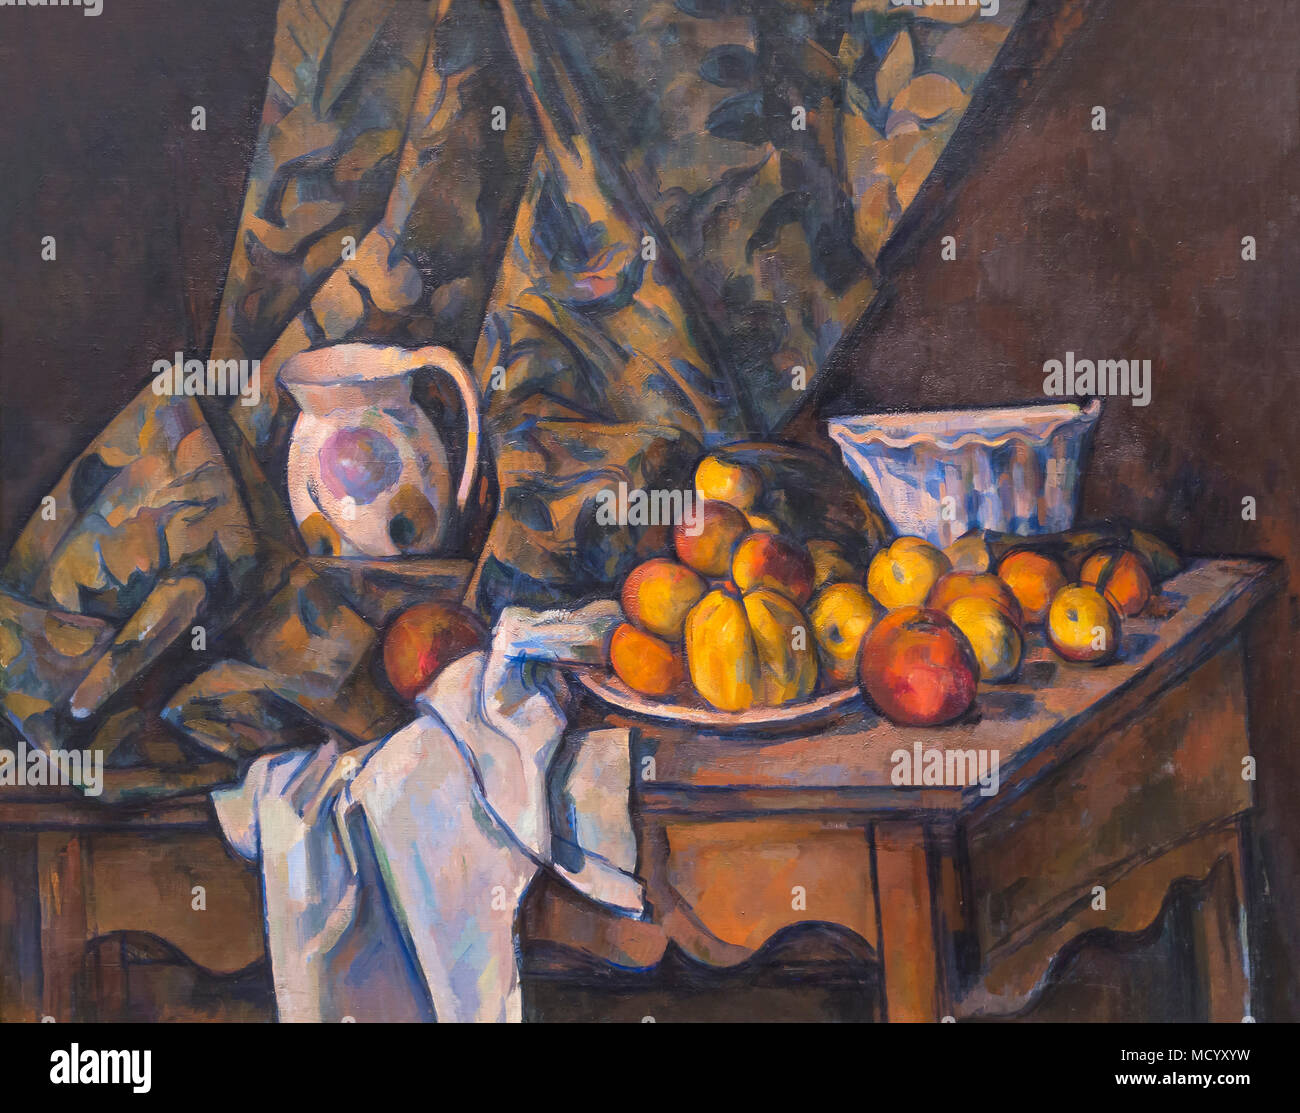 Still Life with Apples and Peaches, Paul Cezanne, circa 1905, National Gallery of Art, Washington DC, USA, North America Stock Photo